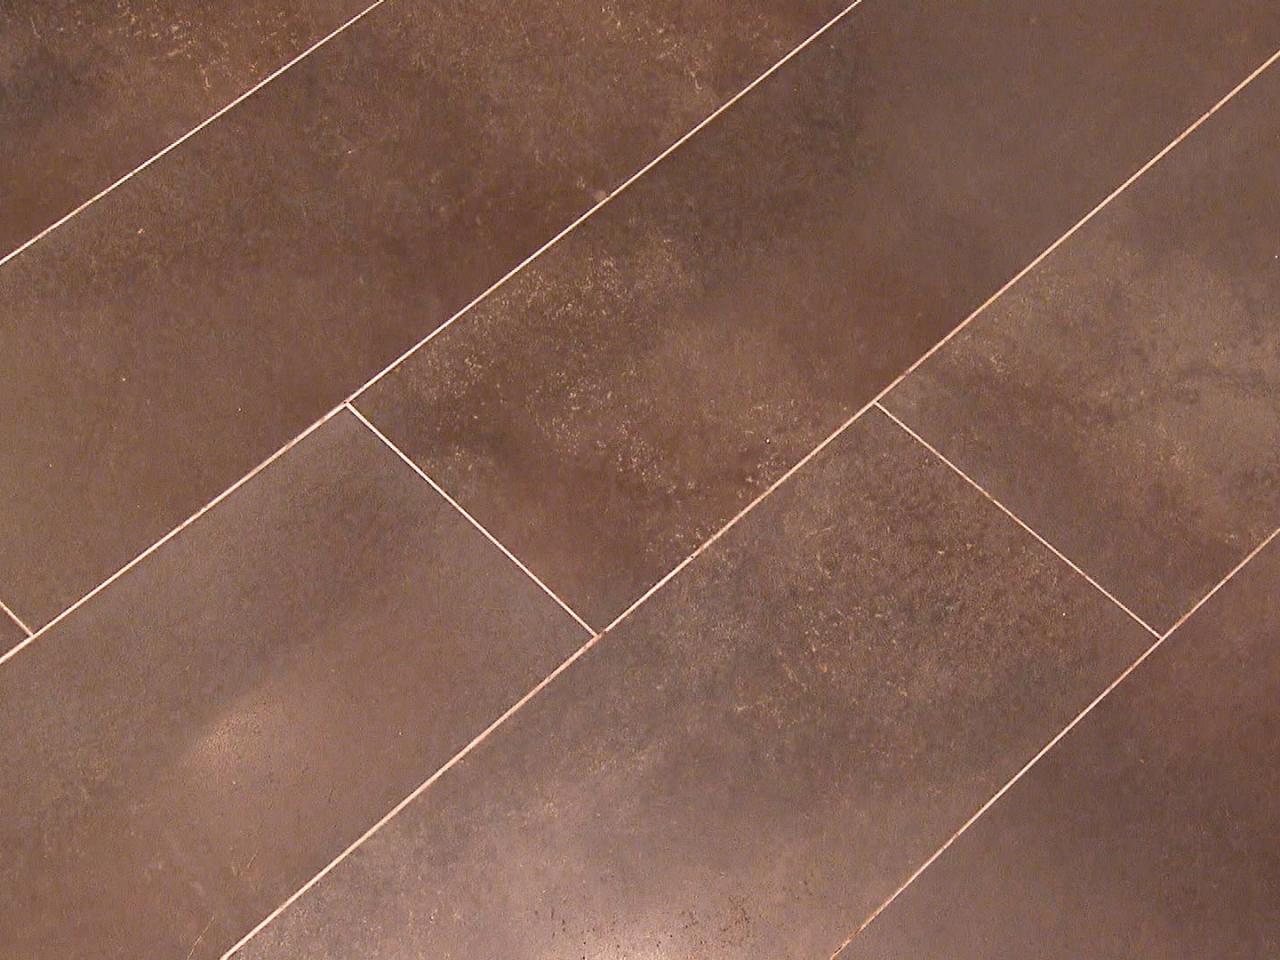 How To Install A Plank Tile Floor, How To Install A Wood Look Porcelain Plank Tile Floor